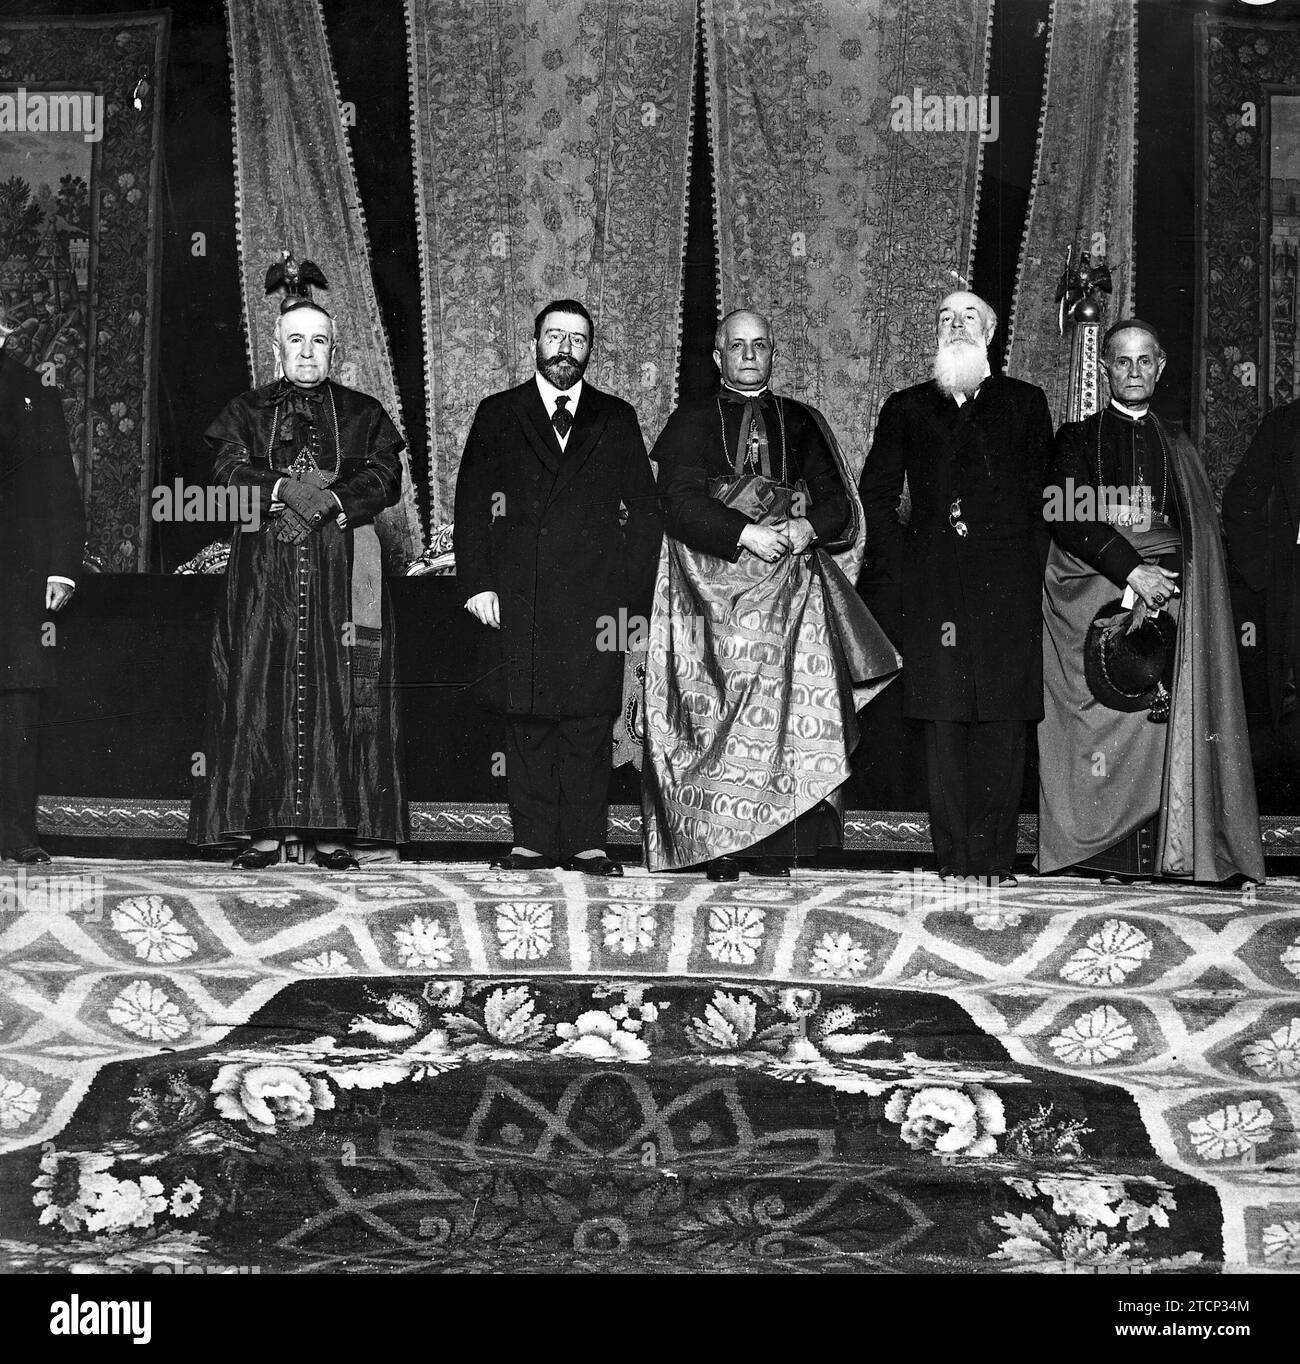 06/29/1913. The Constantinian Festivals. The Bishops of Madrid, D. Juan Vázquez de Mella, the nuncio of His Holiness, D. Alejandro Pidal and the bishop of Sion who took part in the solemn Evening with which the closing of the Festivities was celebrated yesterday in San Jerónimo. Credit: Album / Archivo ABC / Julio Duque Stock Photo